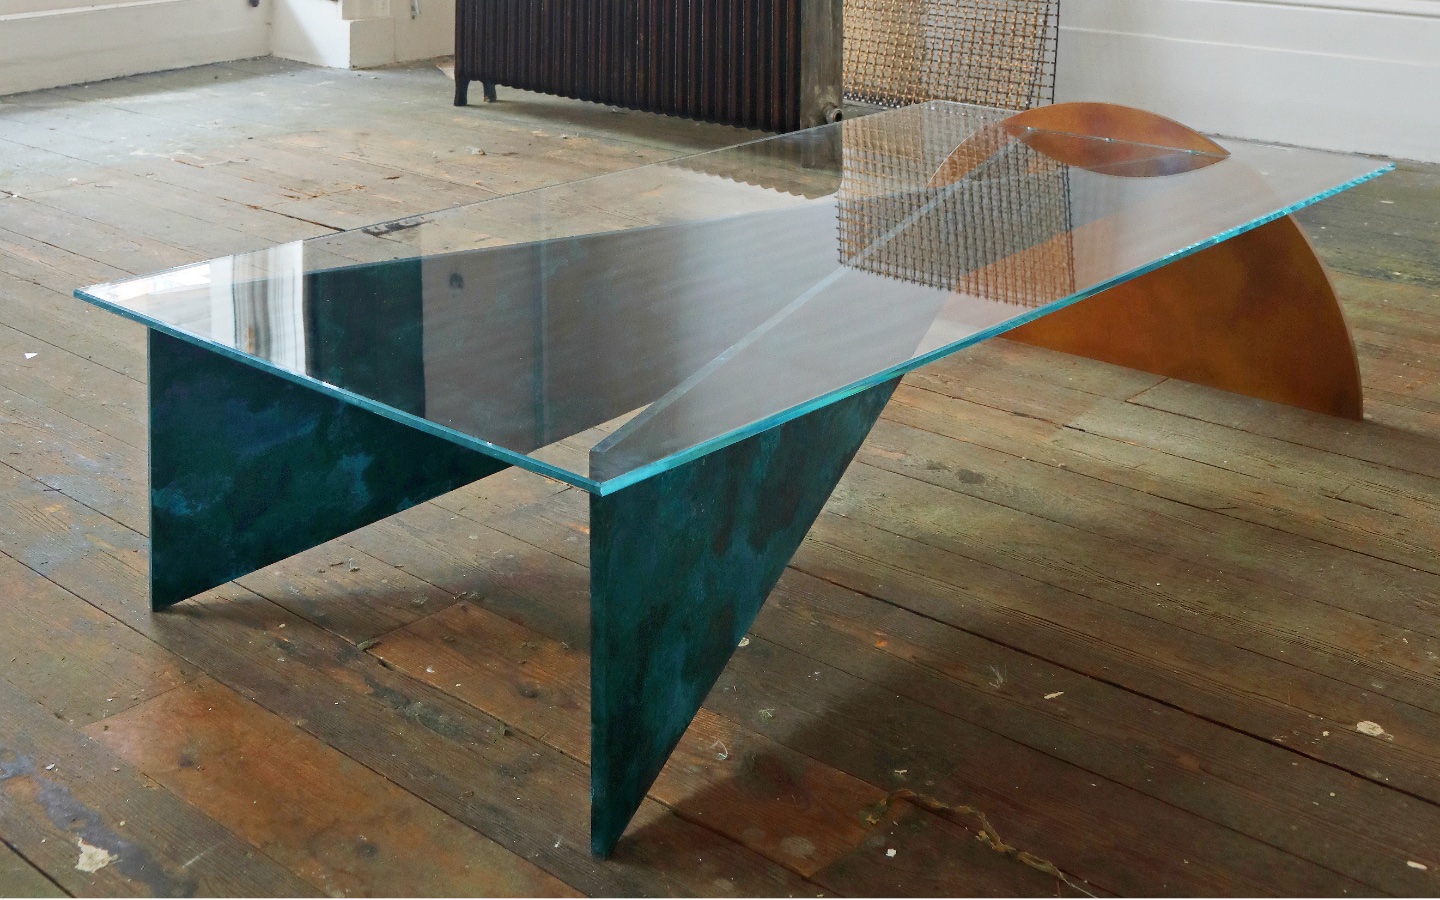 Thonis Table designed by Studioloop. Geometric shapes slot together to form the table structure, with low iron glass top. Patinated finishes